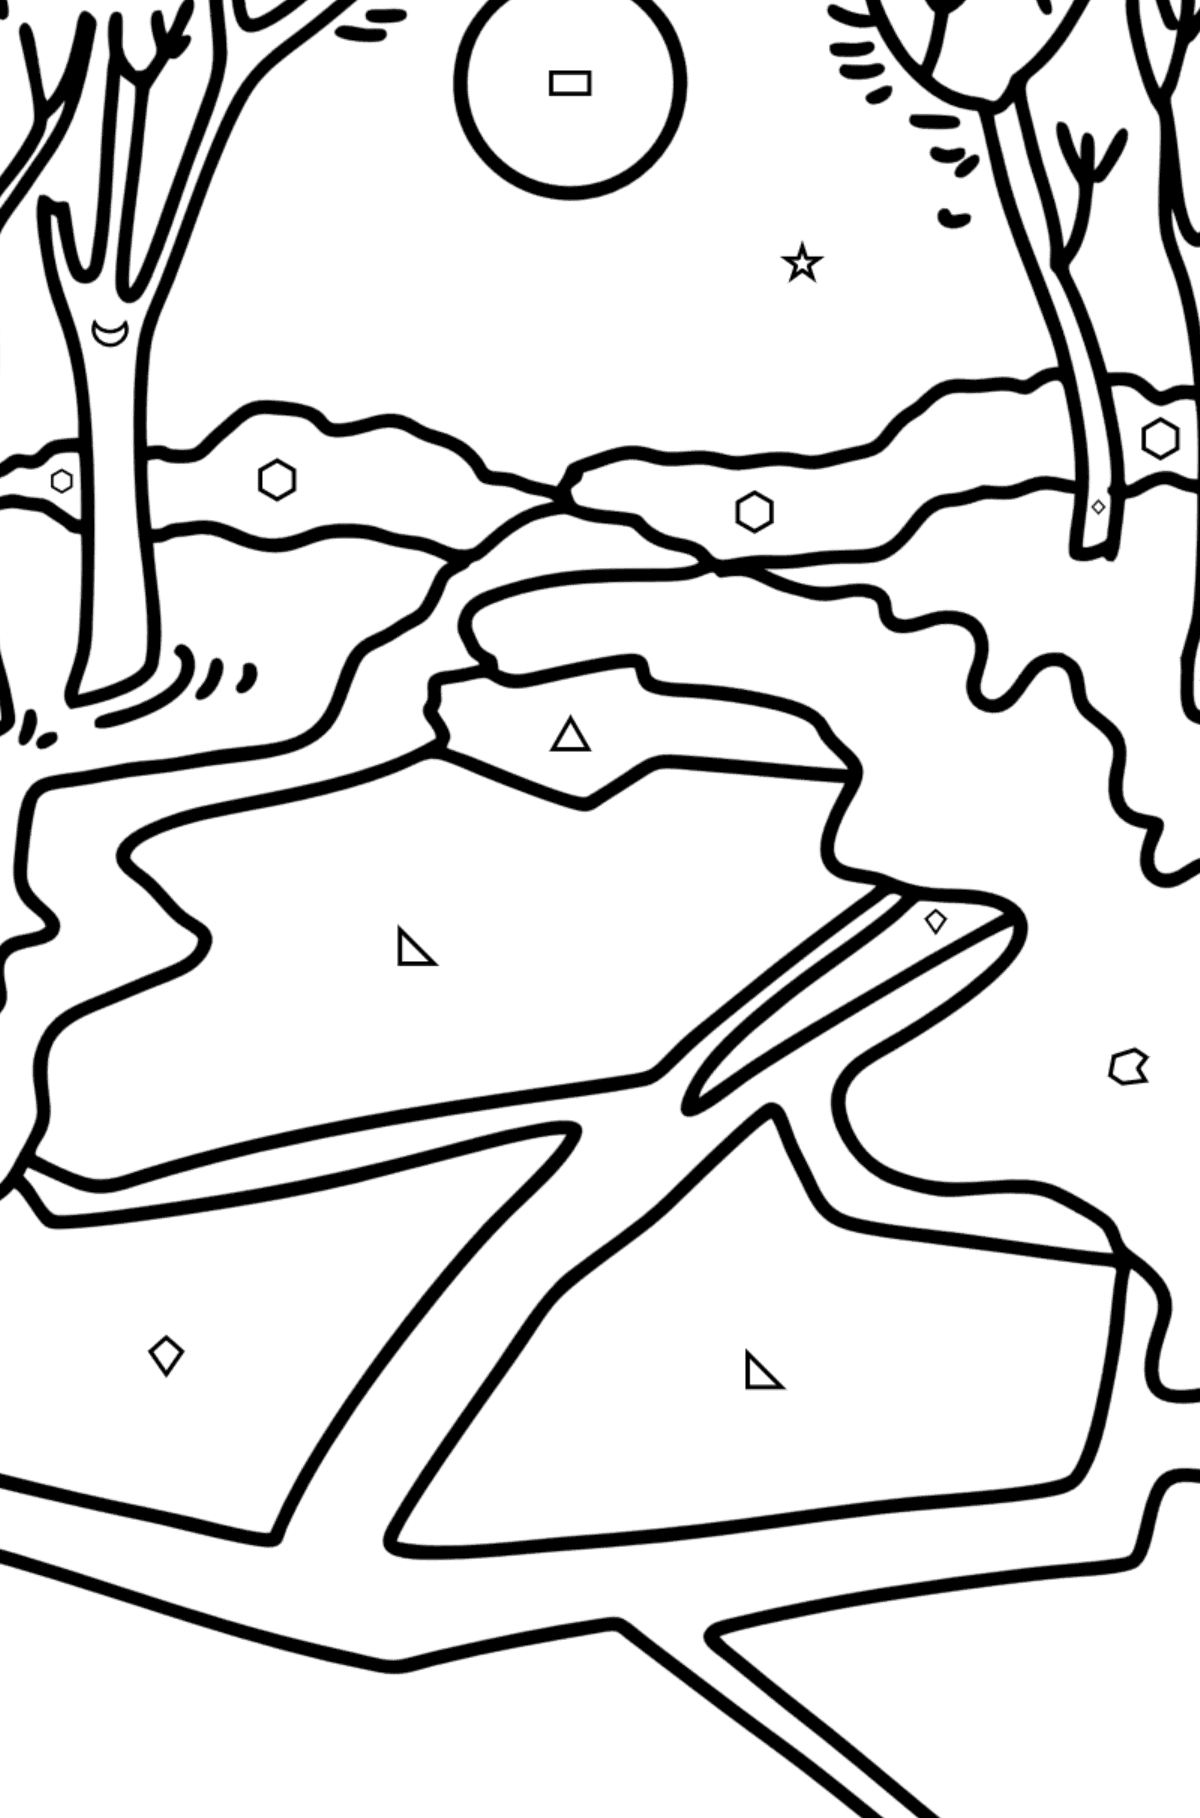 Spring River coloring page - Coloring by Geometric Shapes for Kids